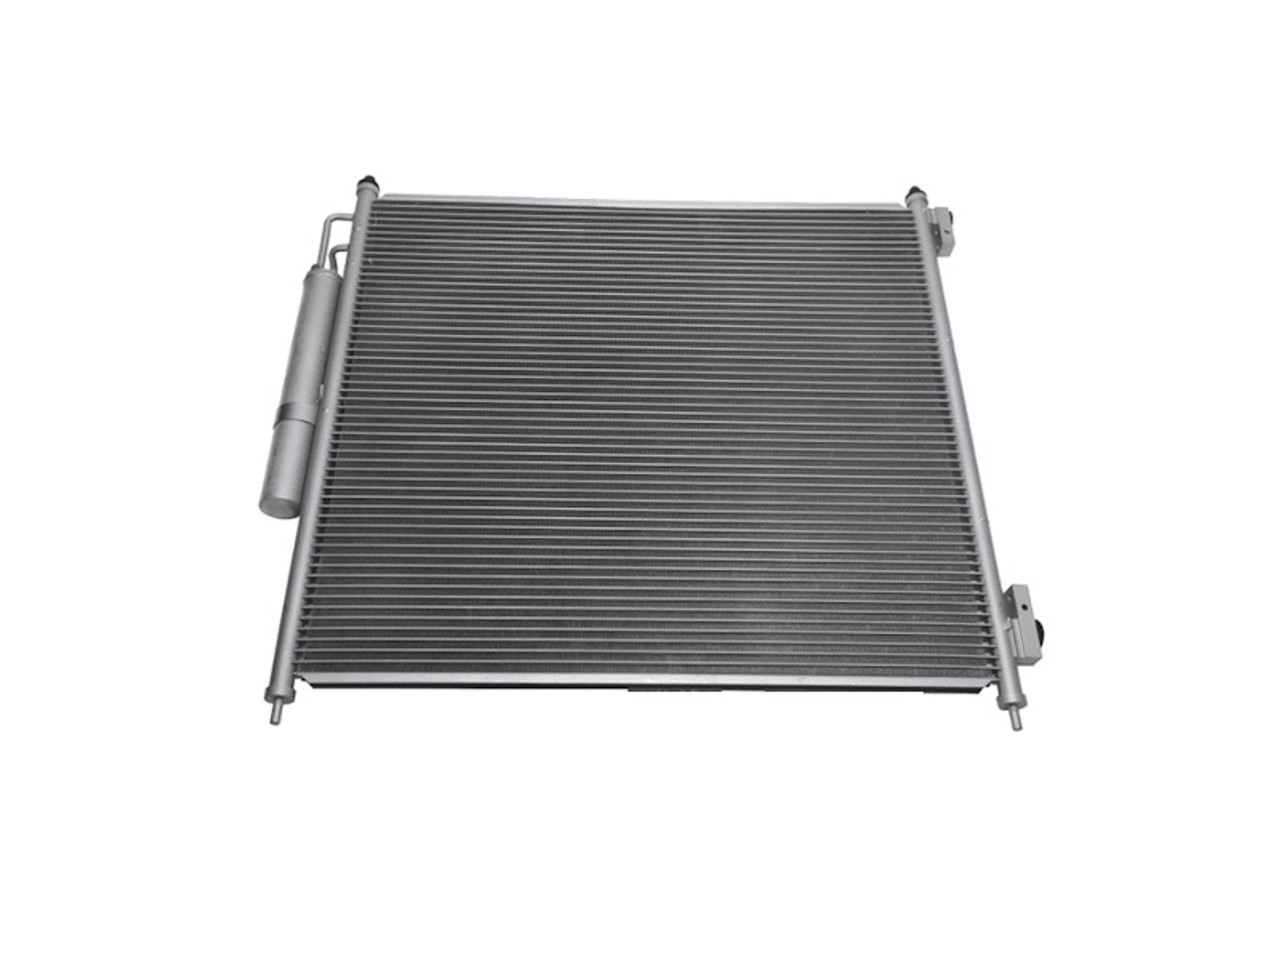 Genuine New Defender and Discovery 5 Petrol AJ20P6 Air Conditioning Condenser - LR137975